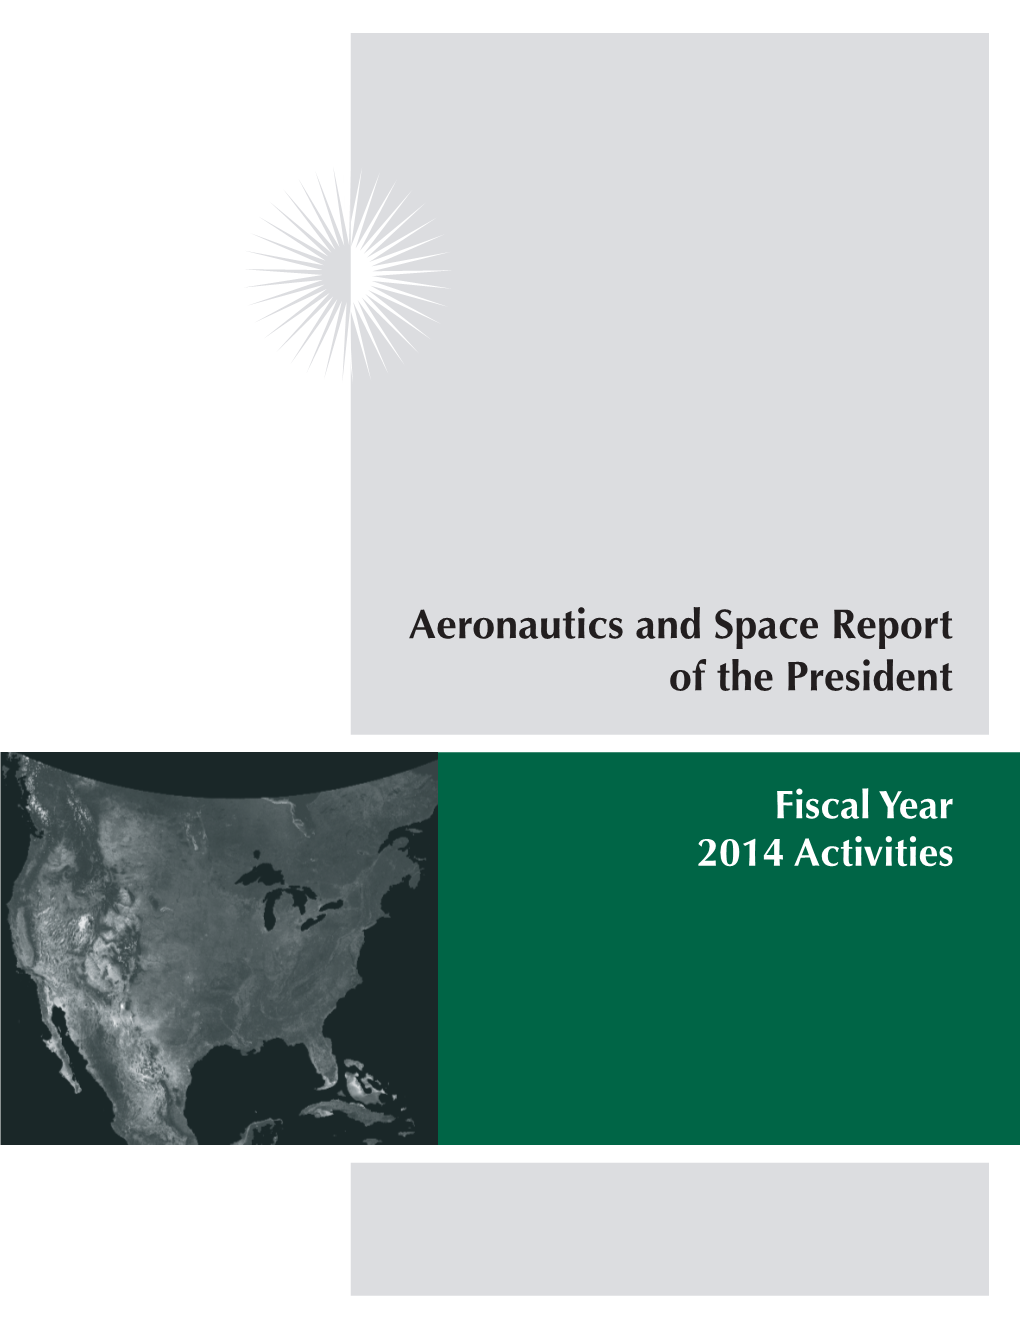 Aeronautics and Space Report of the President: Fiscal Year 2014 Activities